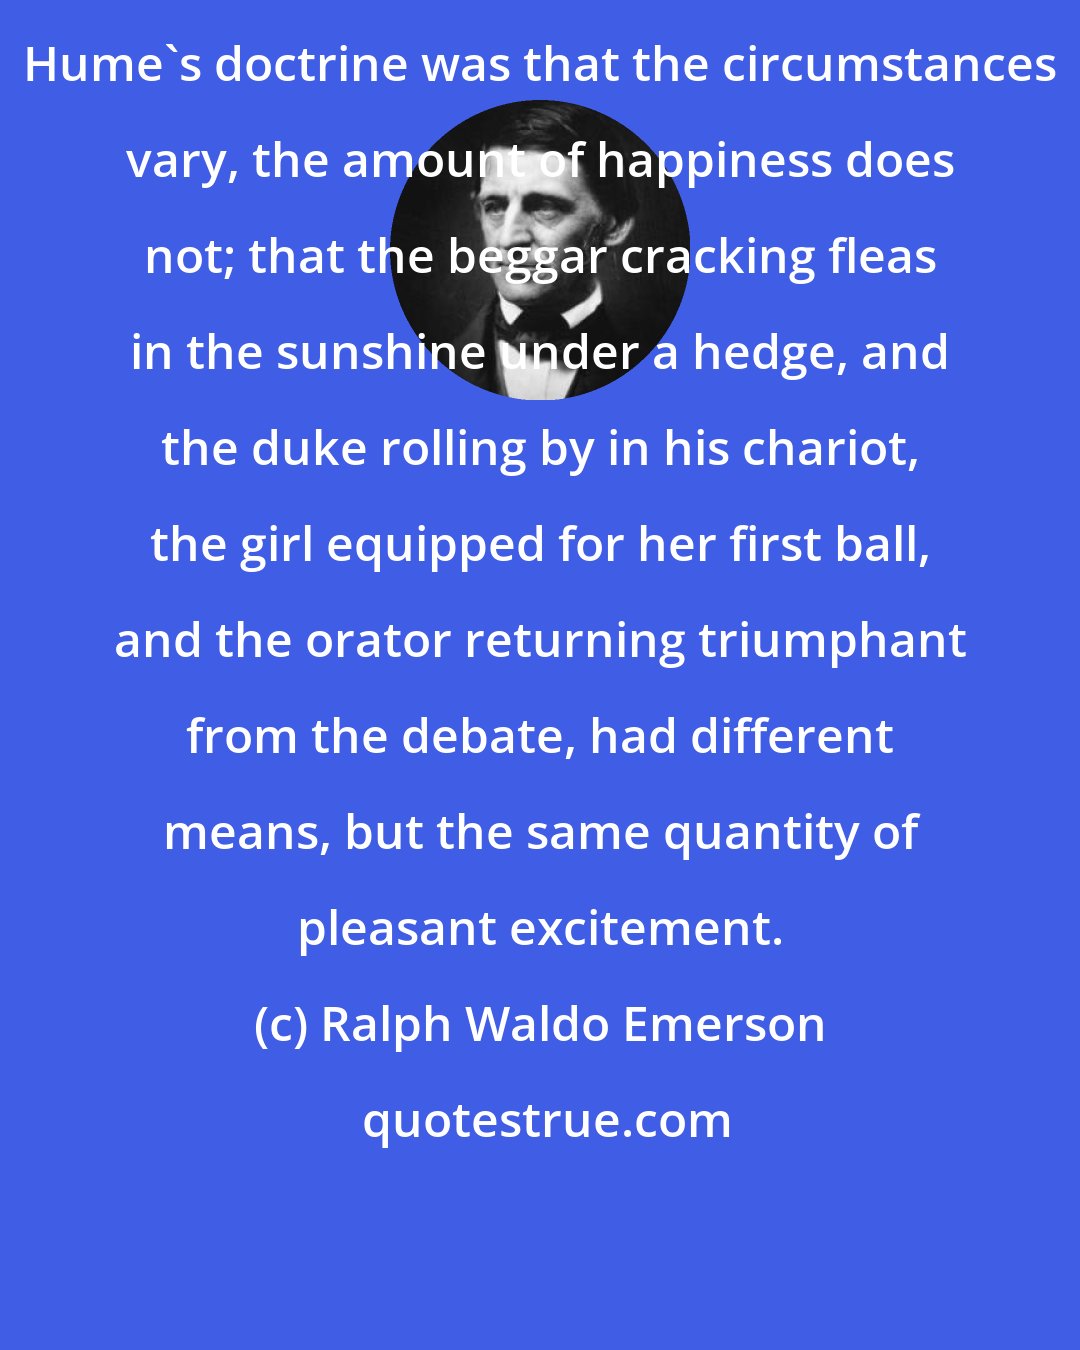 Ralph Waldo Emerson: Hume's doctrine was that the circumstances vary, the amount of happiness does not; that the beggar cracking fleas in the sunshine under a hedge, and the duke rolling by in his chariot, the girl equipped for her first ball, and the orator returning triumphant from the debate, had different means, but the same quantity of pleasant excitement.